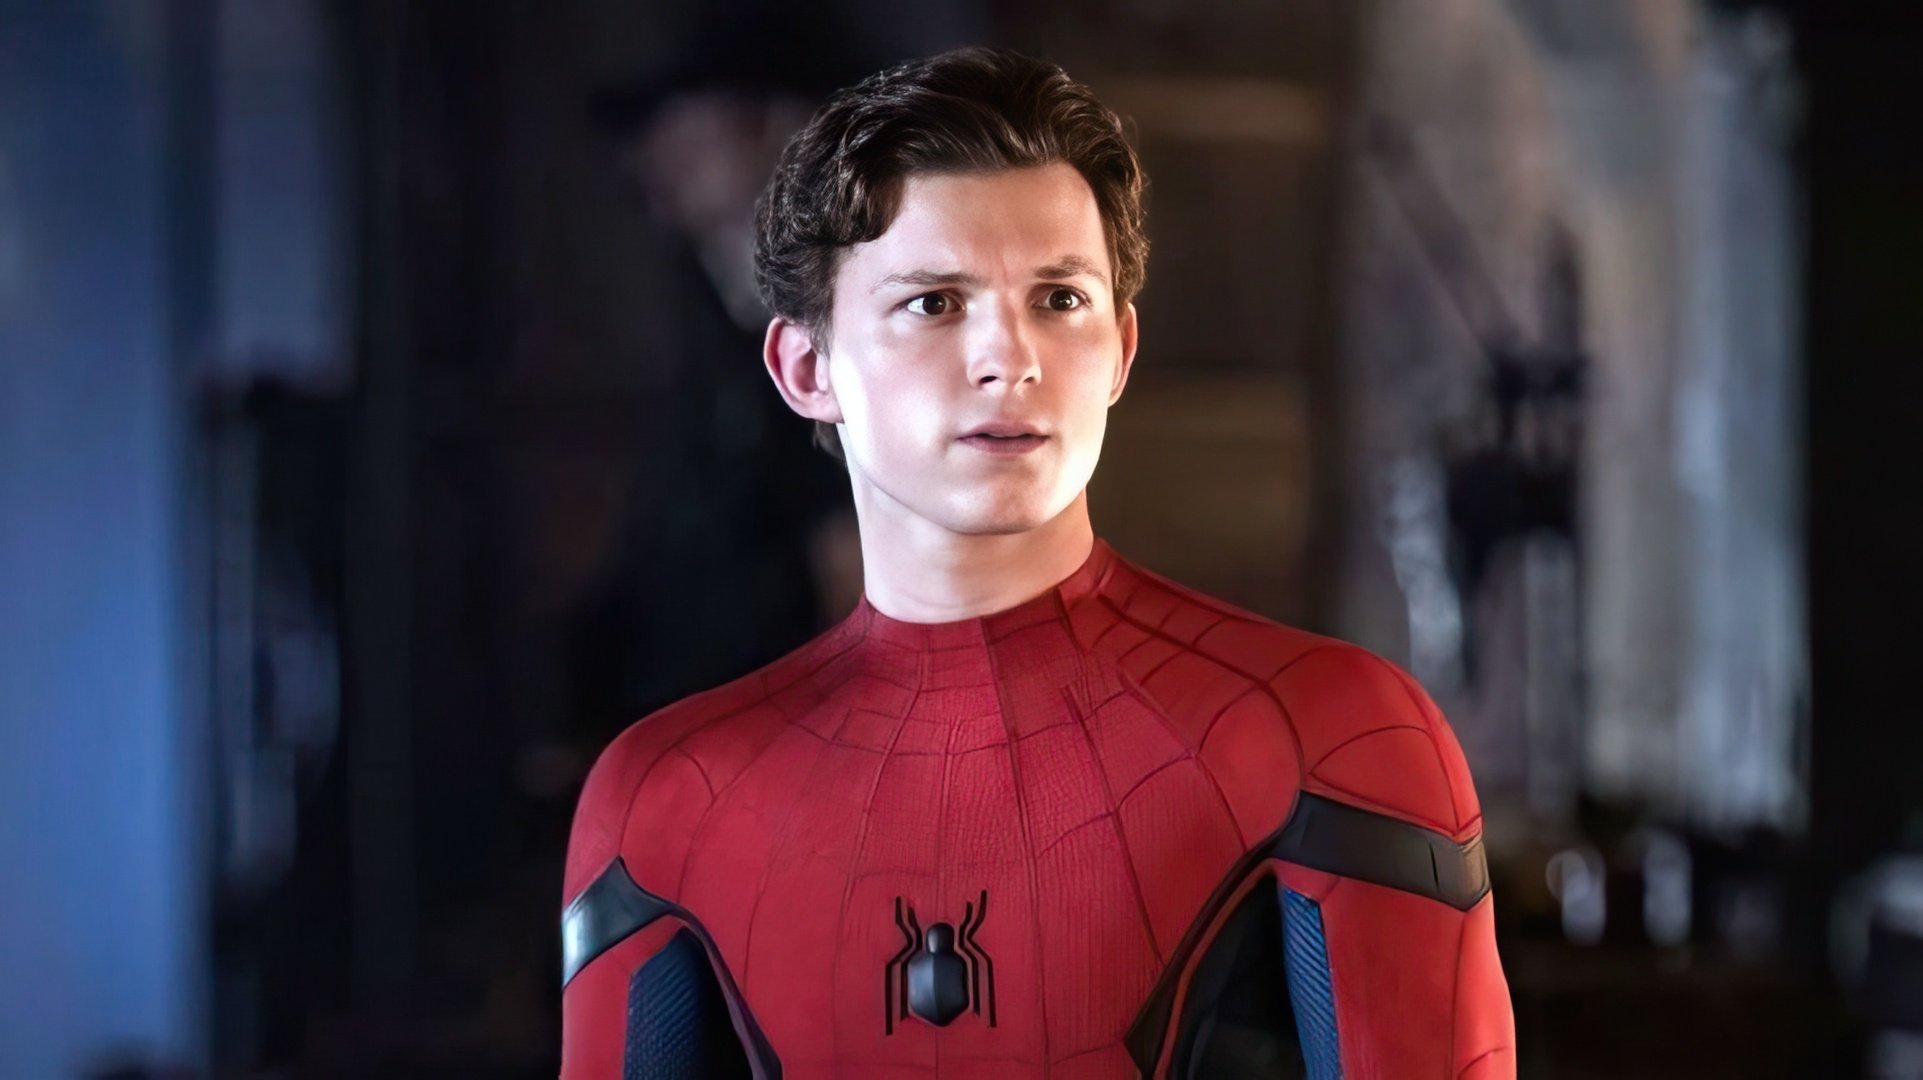 Tom Holland in the movie 'Spider-Man: No Way Home'